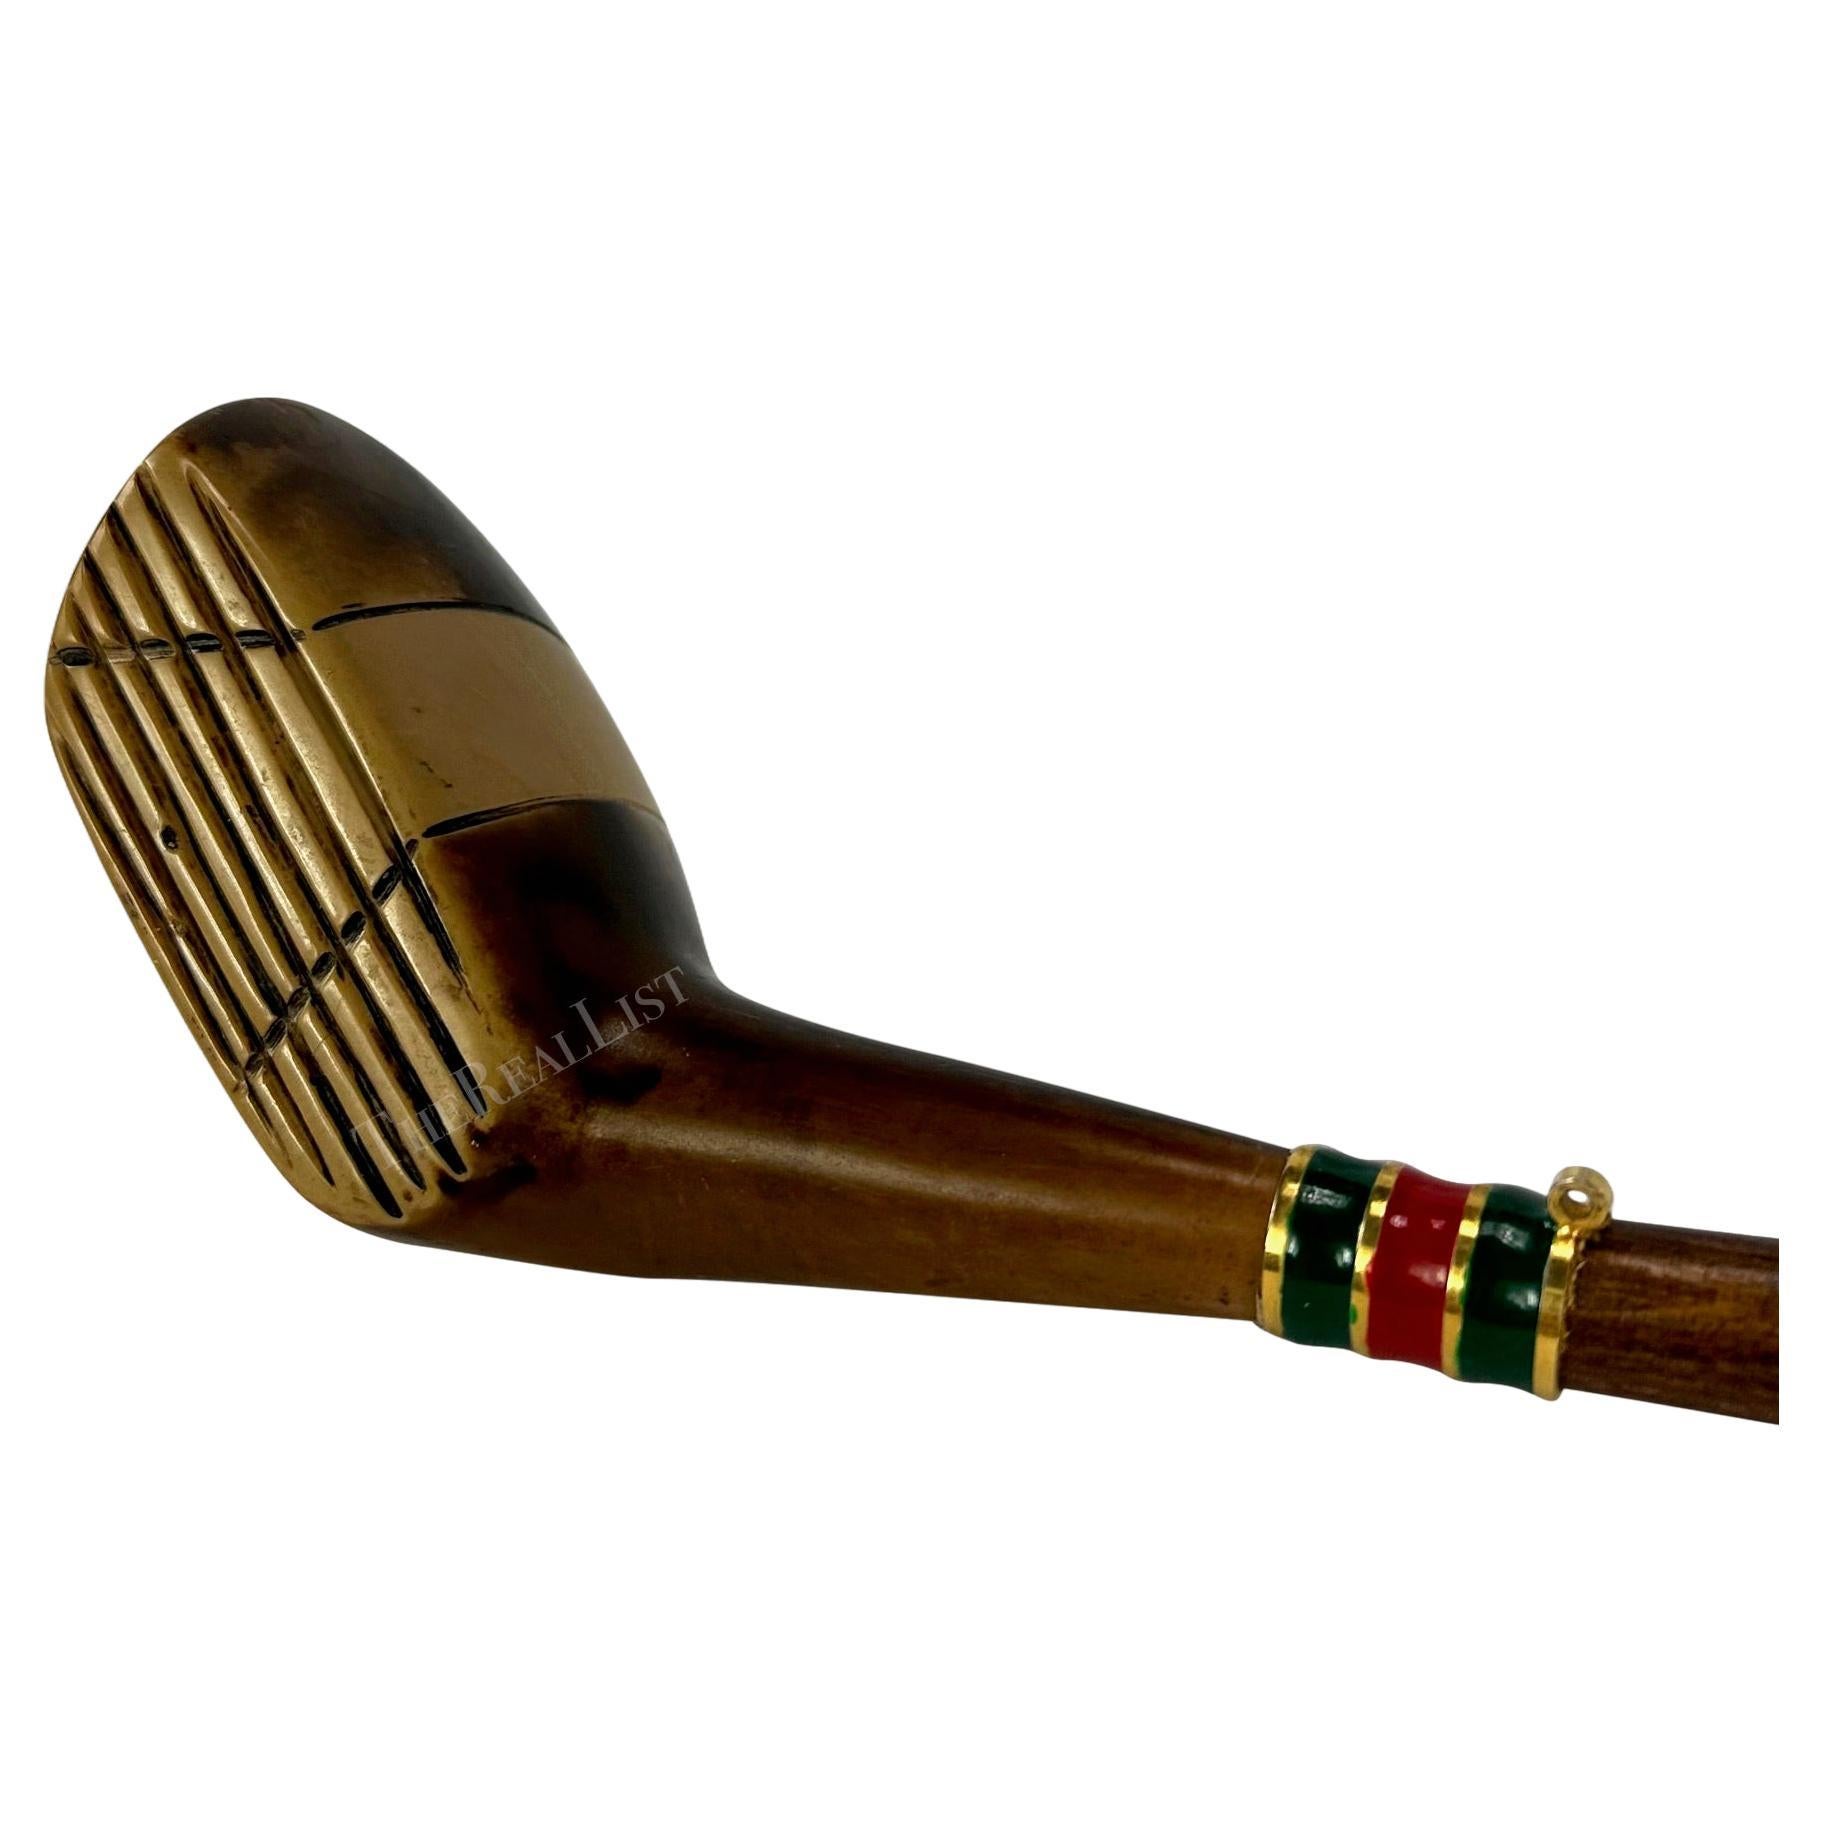 Presenting a wooden golf club Gucci shoe horn. From the 1970s, this wooden shoe horn features a golf club head on one end and a horn shoe horn on the other end. This rare Gucci shoe horn is the perfect gift for the golf lover who has everything!